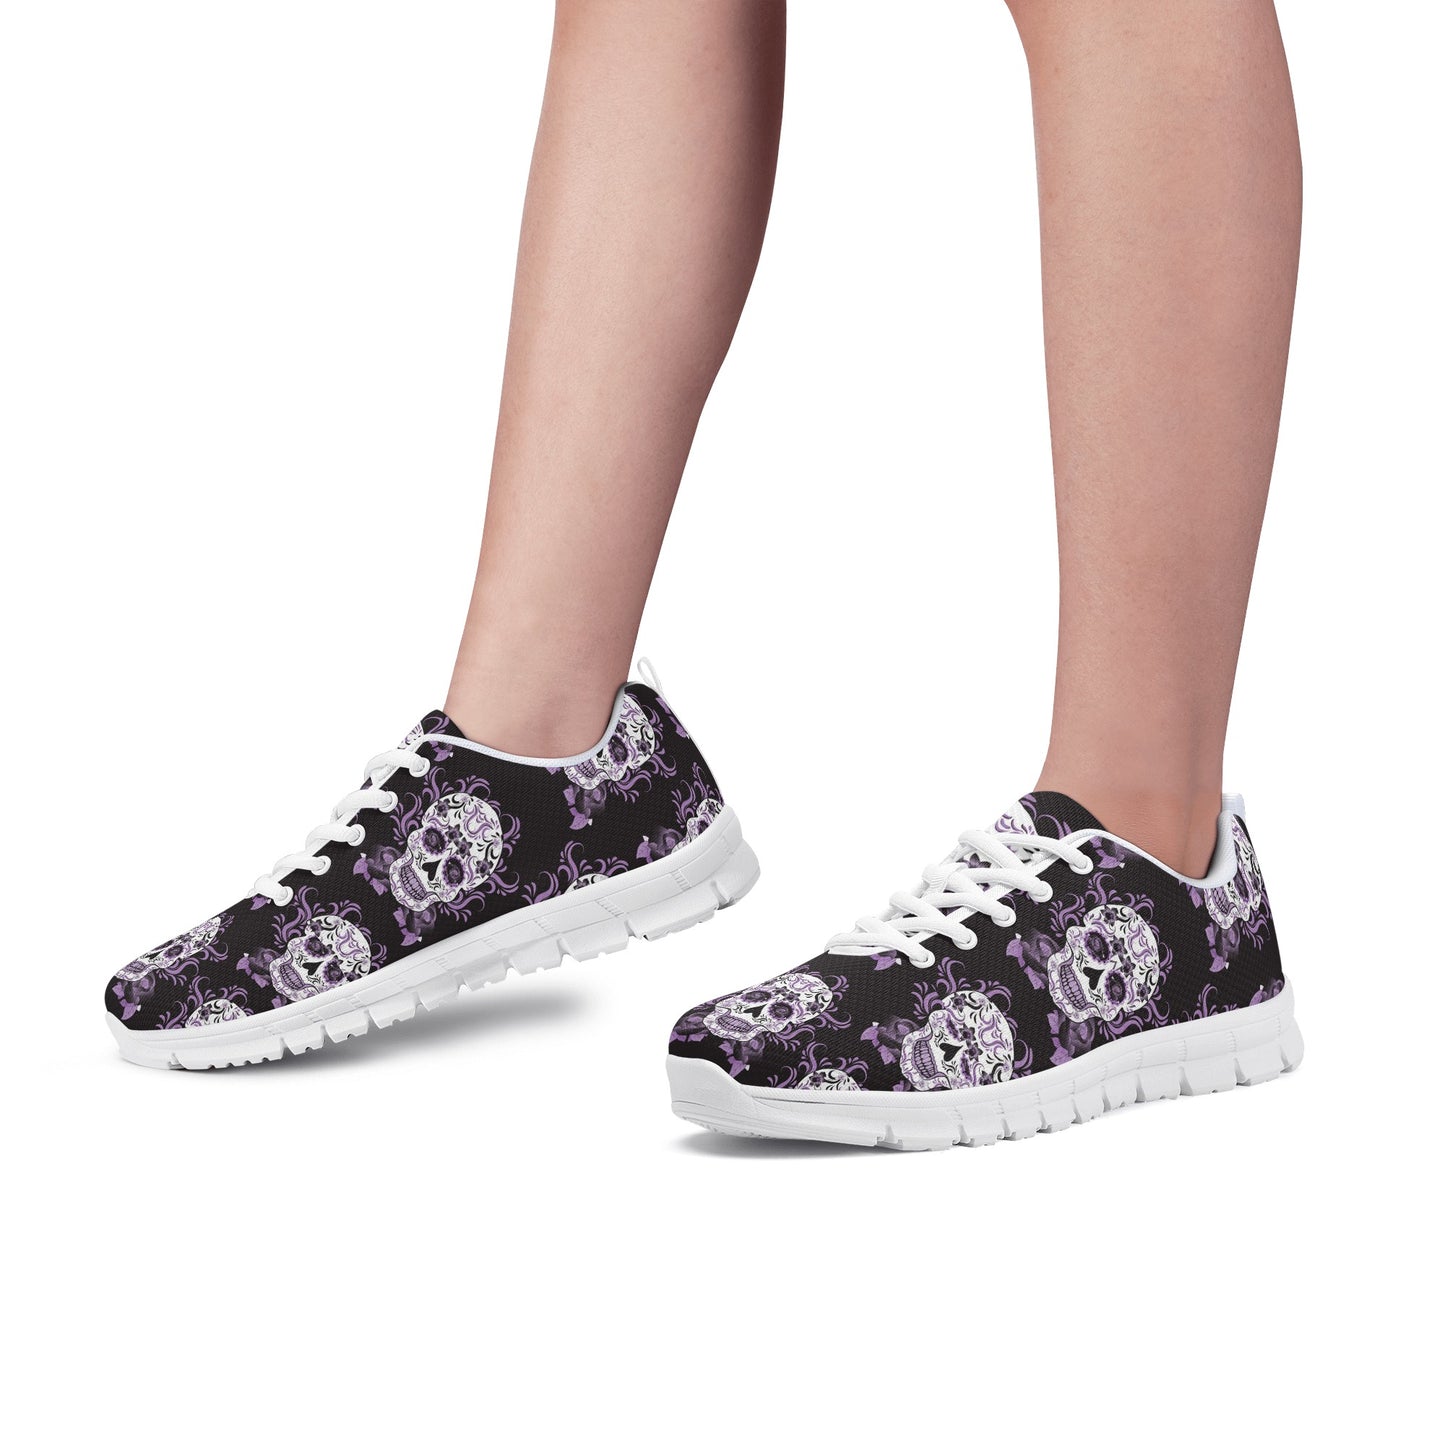 Day of the dead candy skull calaveras Women's Running Shoes